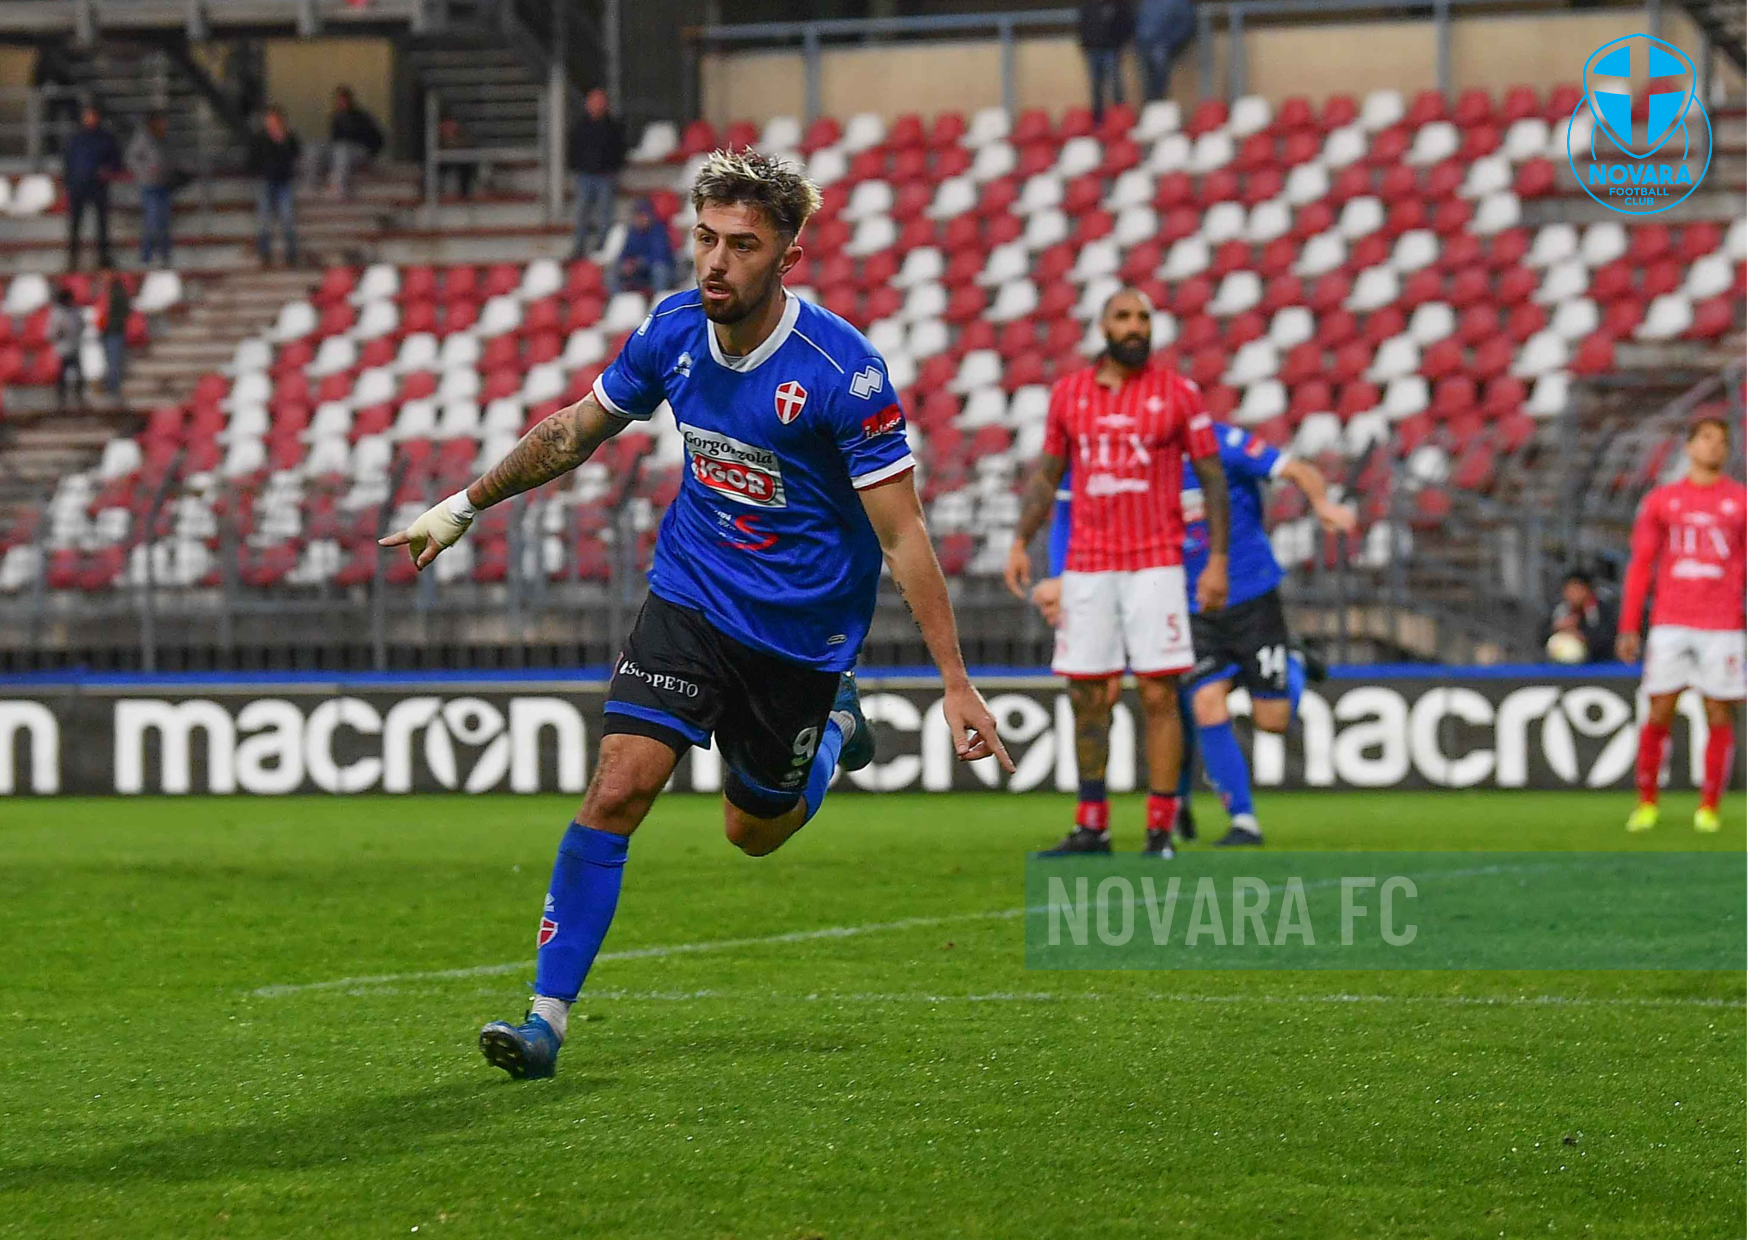 Read more about the article Piacenza-Novara 1-1 | Gallery